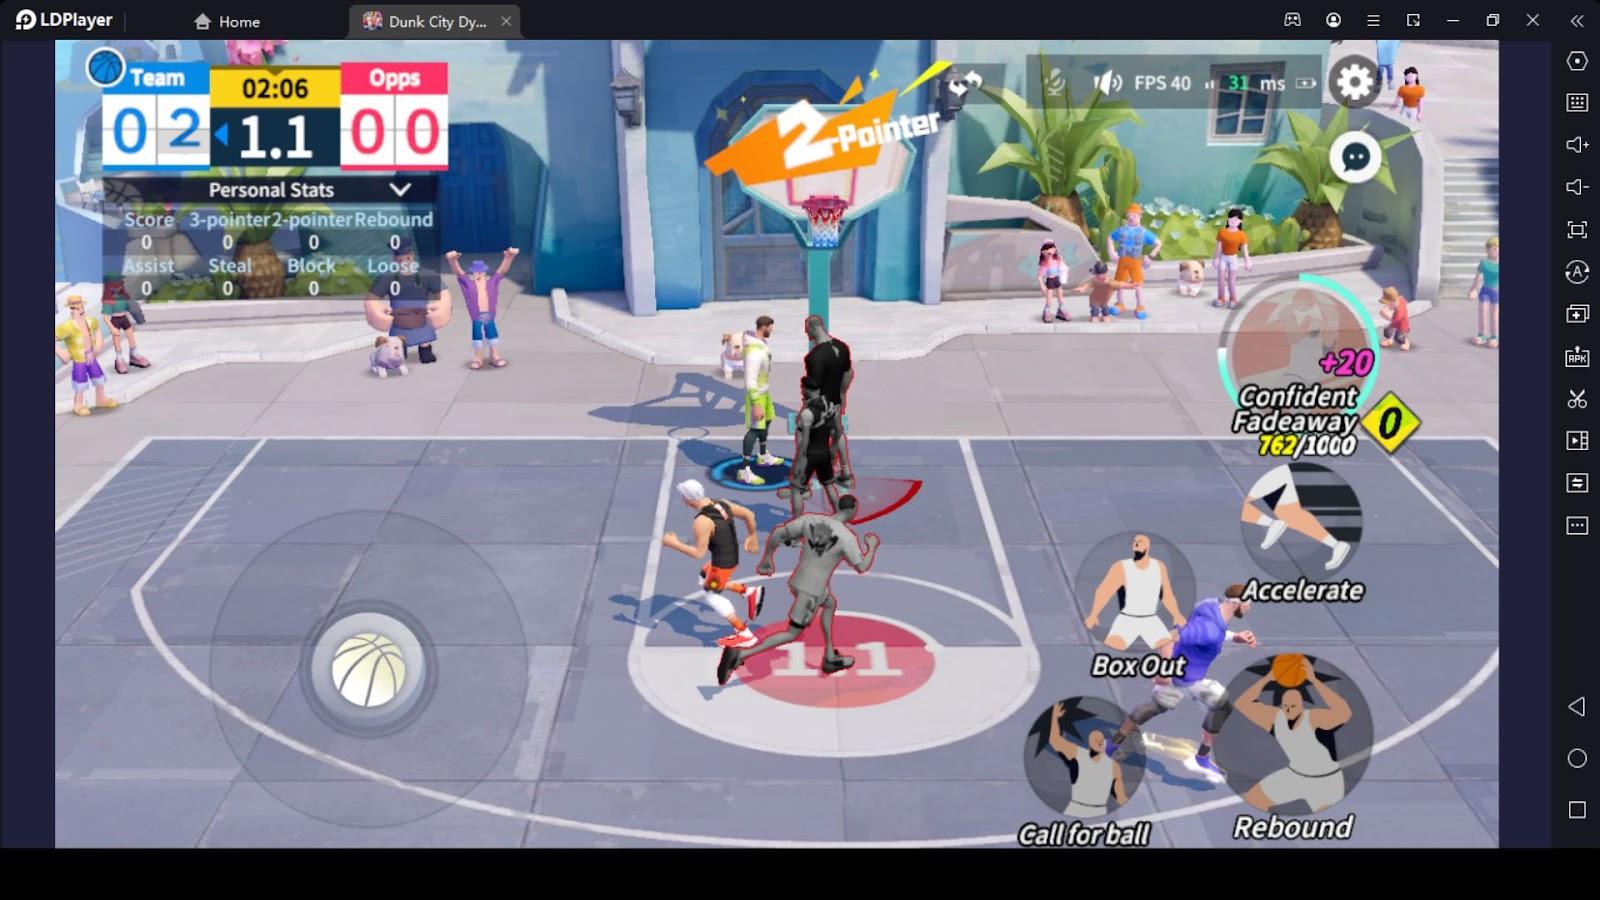 Gameplay in Dunk City Dynasty